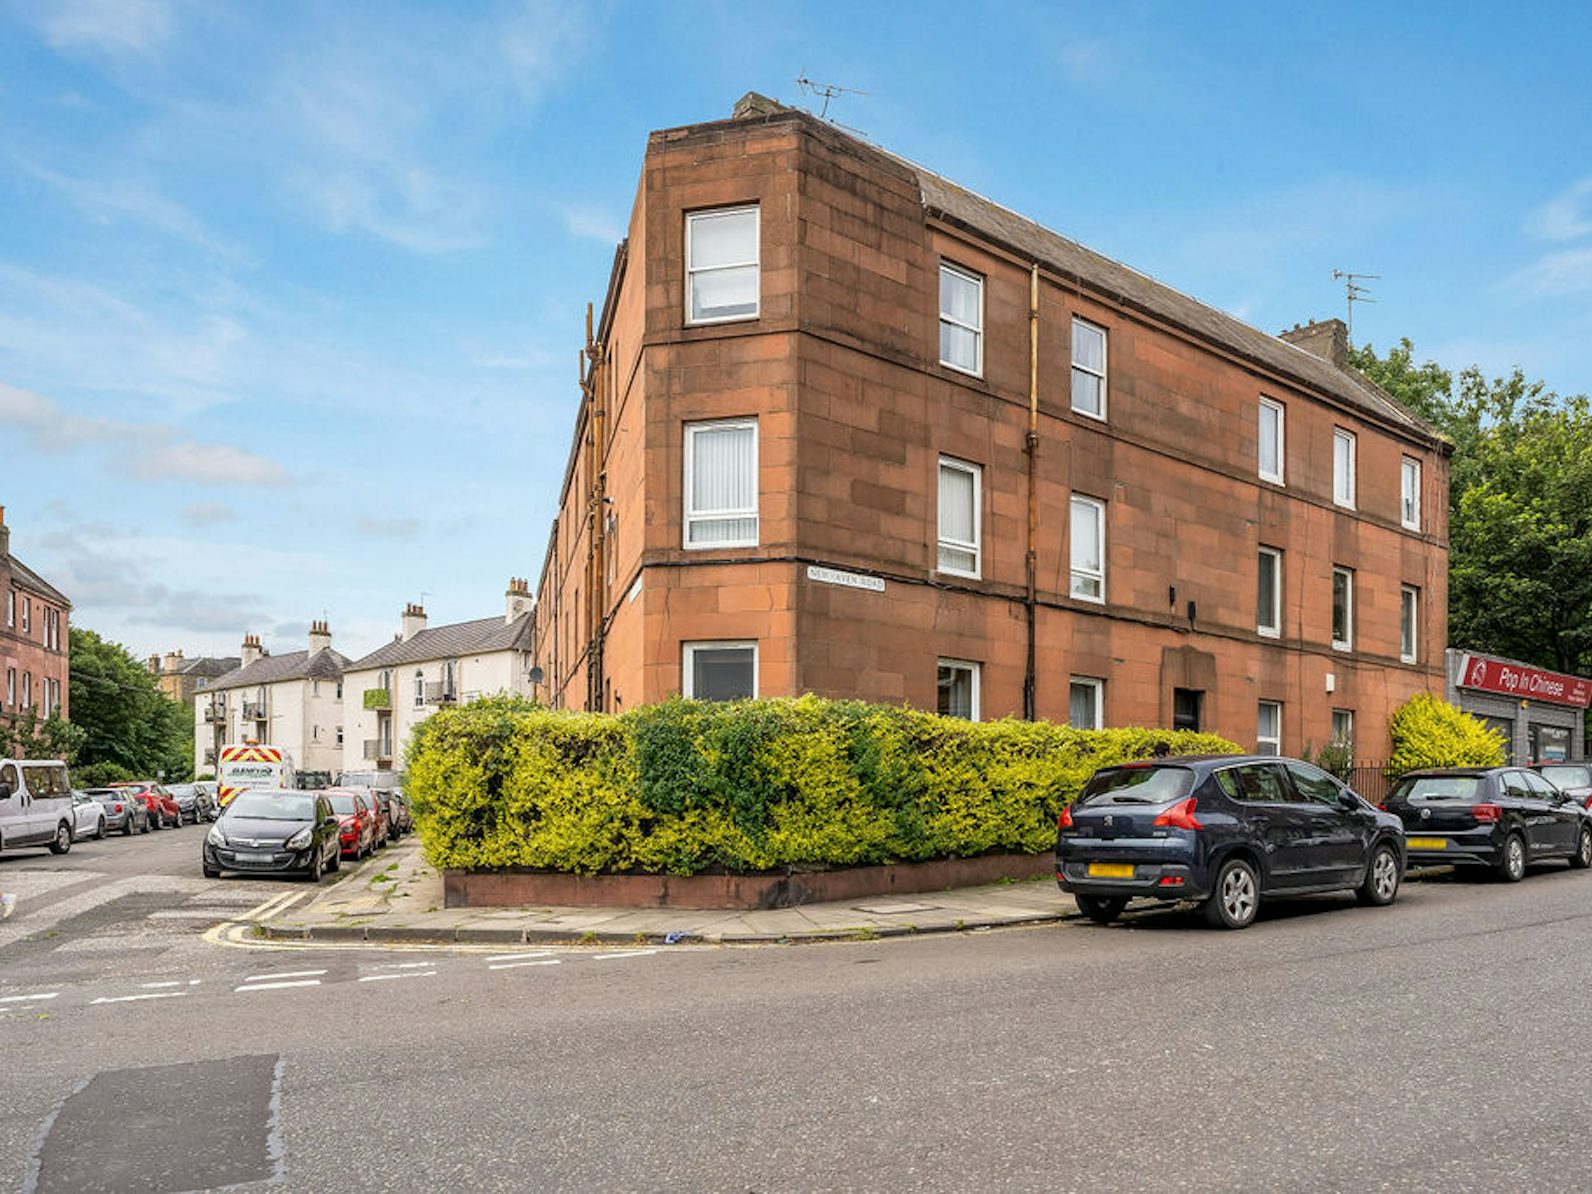 Flat for sale on Newhaven Road Newhaven, Edinburgh, EH6